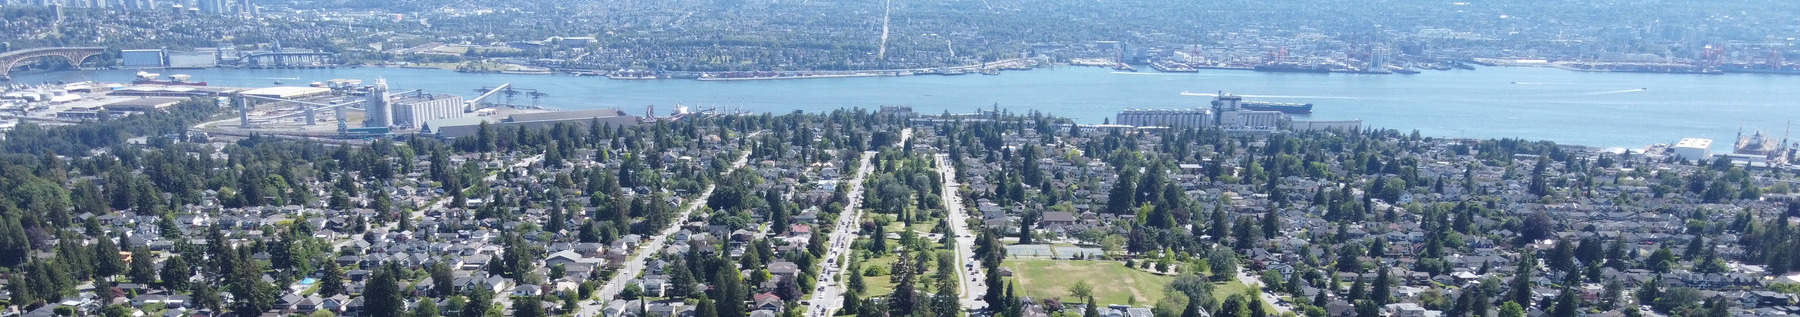 Aerial photo of the City of North Vancouver